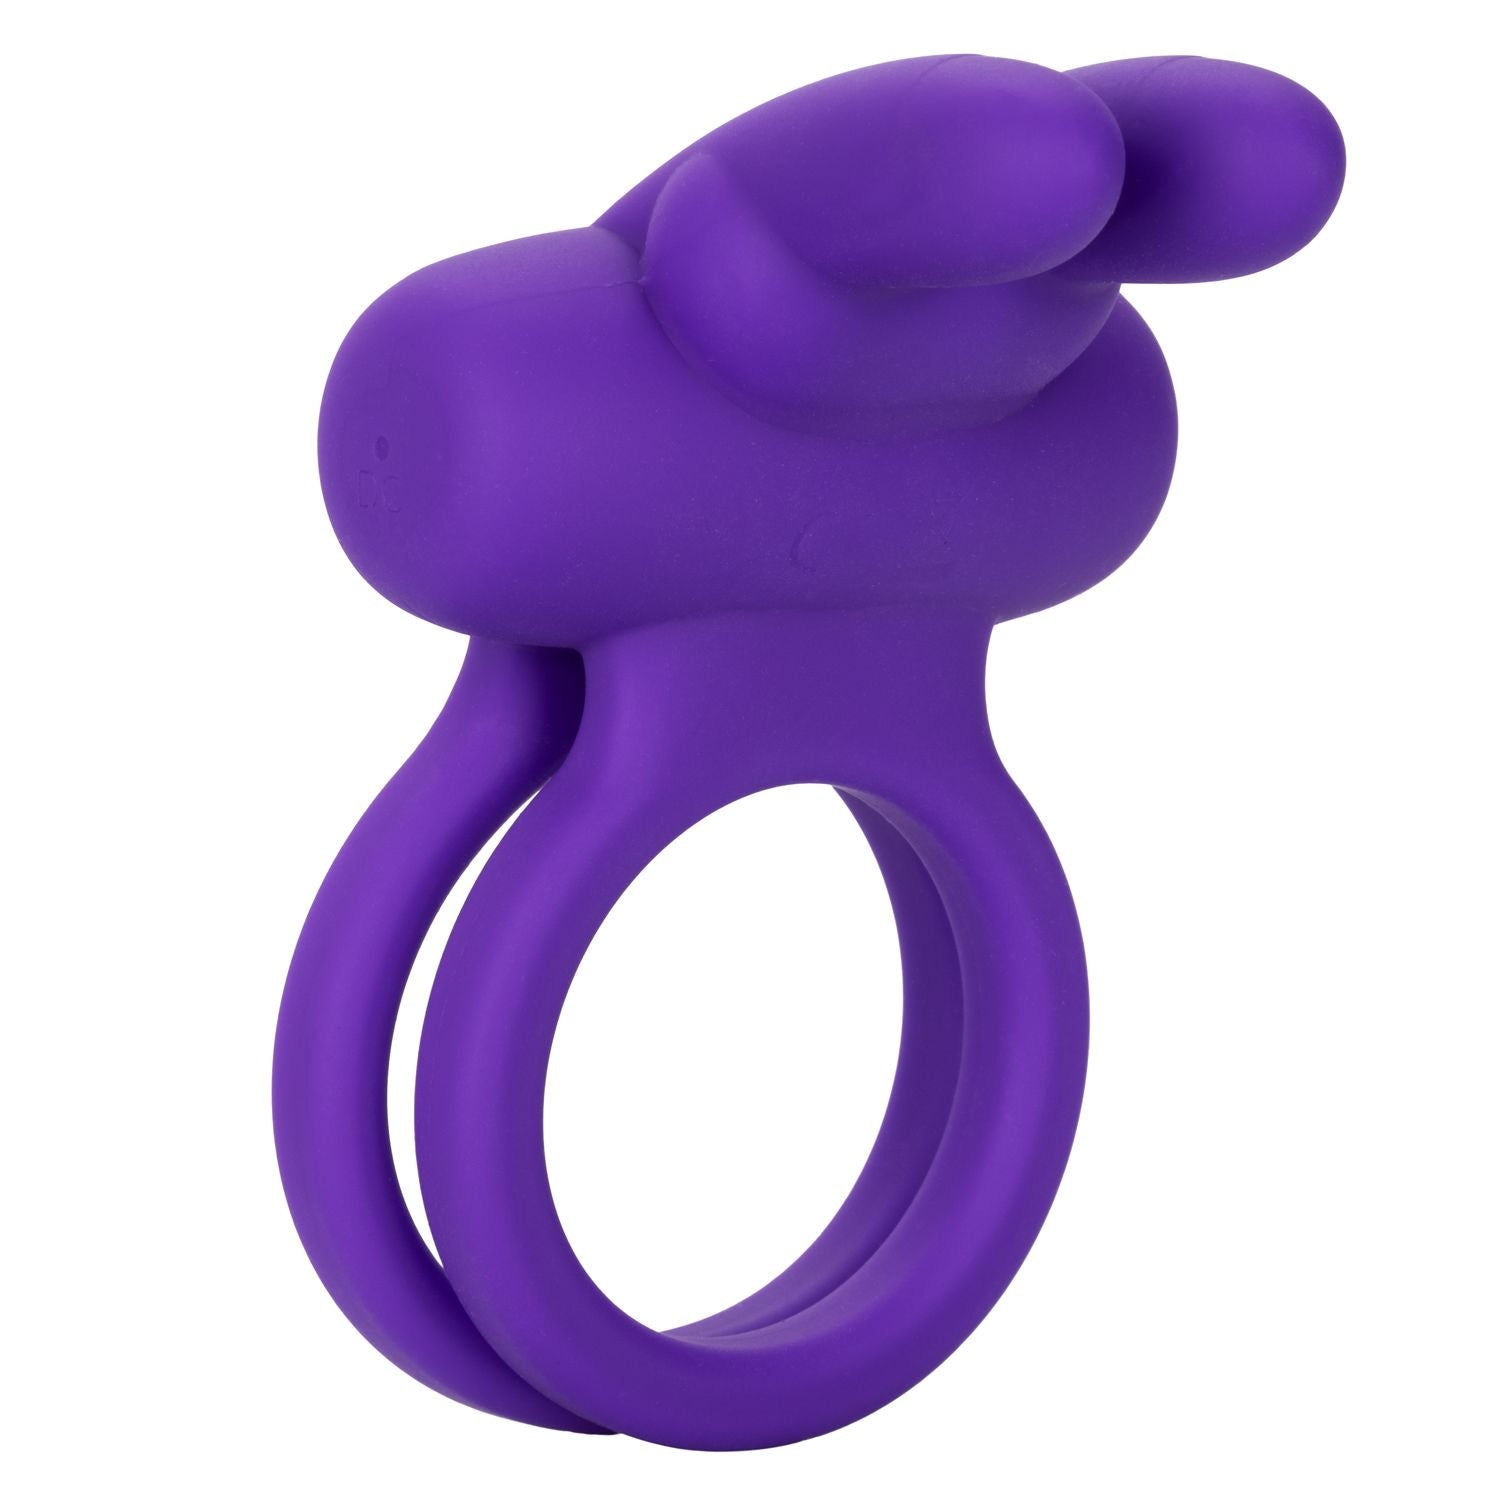 Dual Rockin Rabbit Silicone Vibrating Couples Toy by Calexotics Sideview